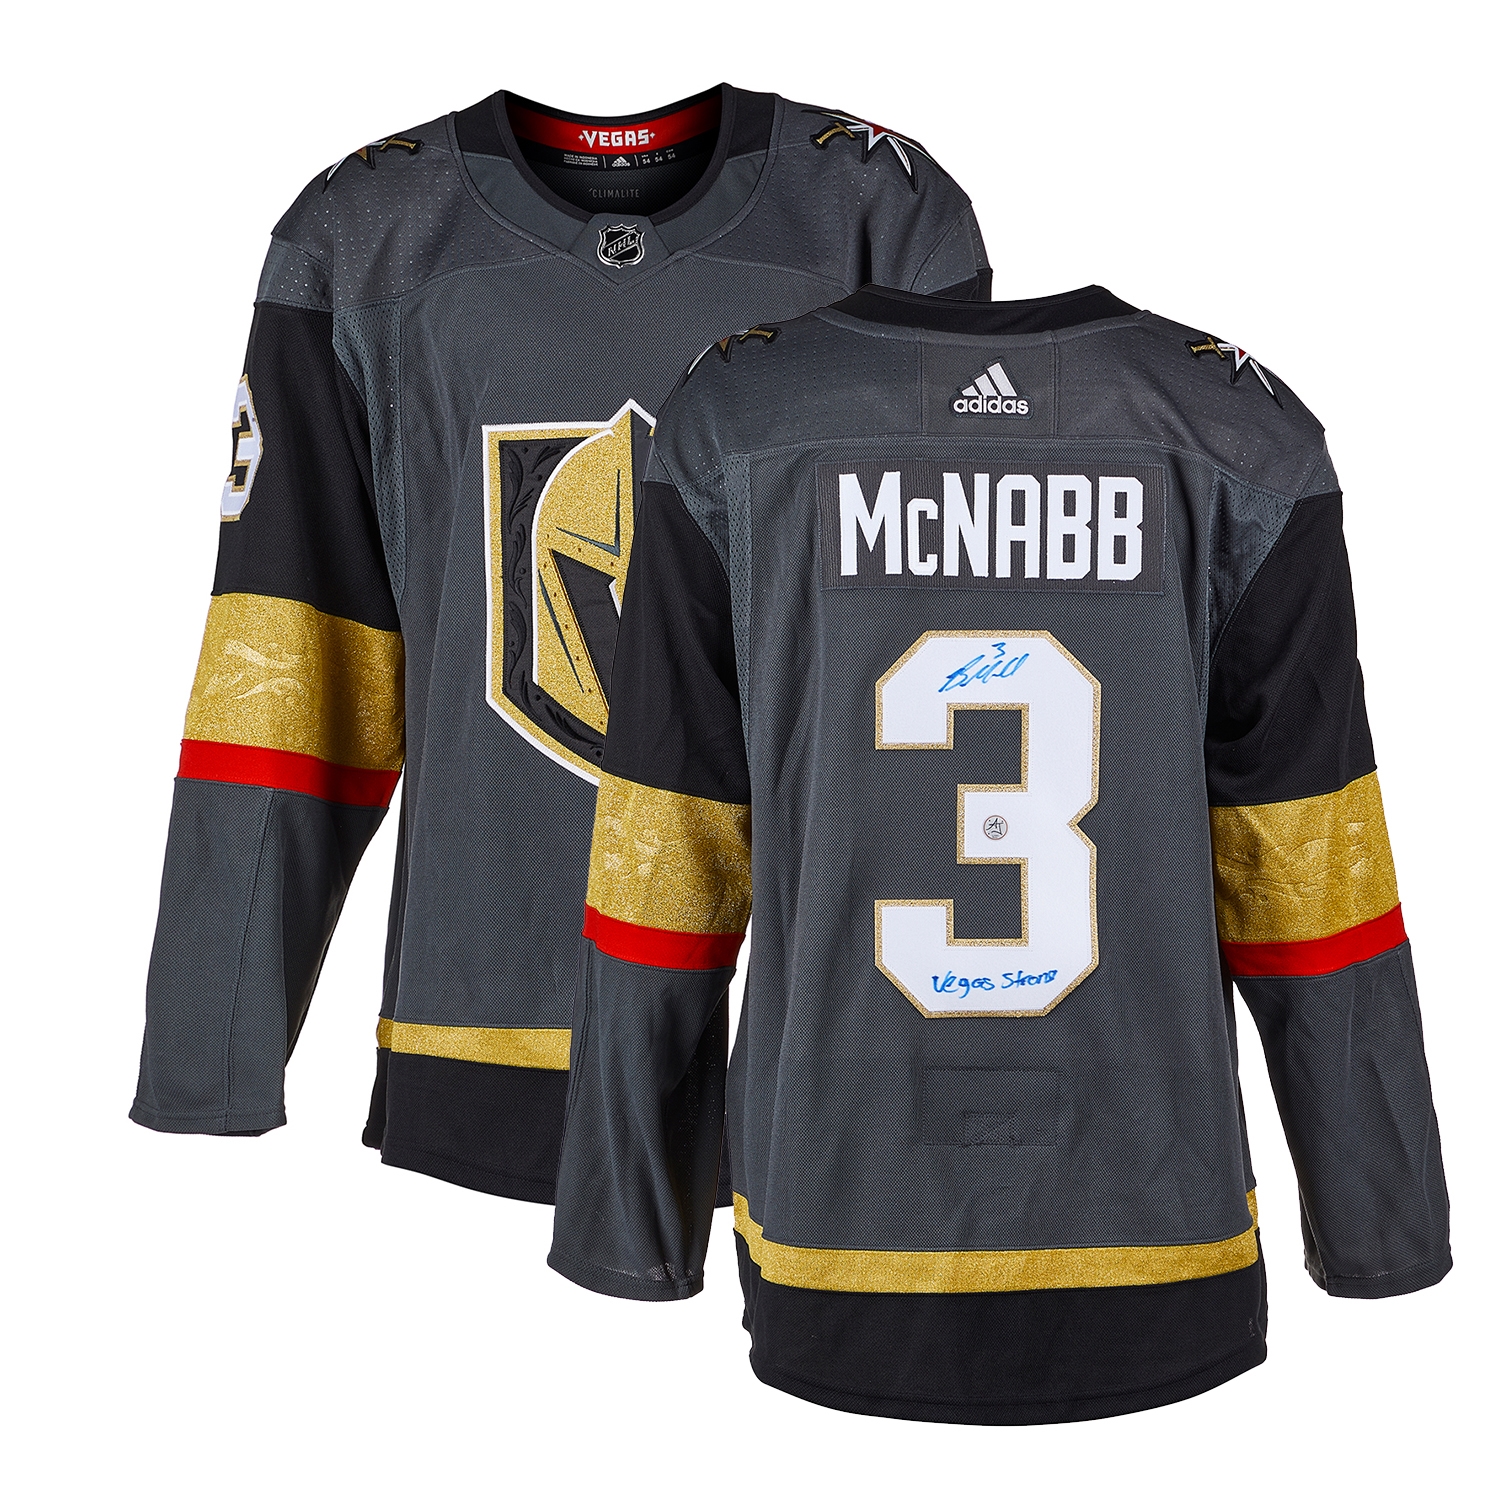 Brayden McNabb Signed Vegas Golden Knights adidas Jersey with Vegas Strong Note